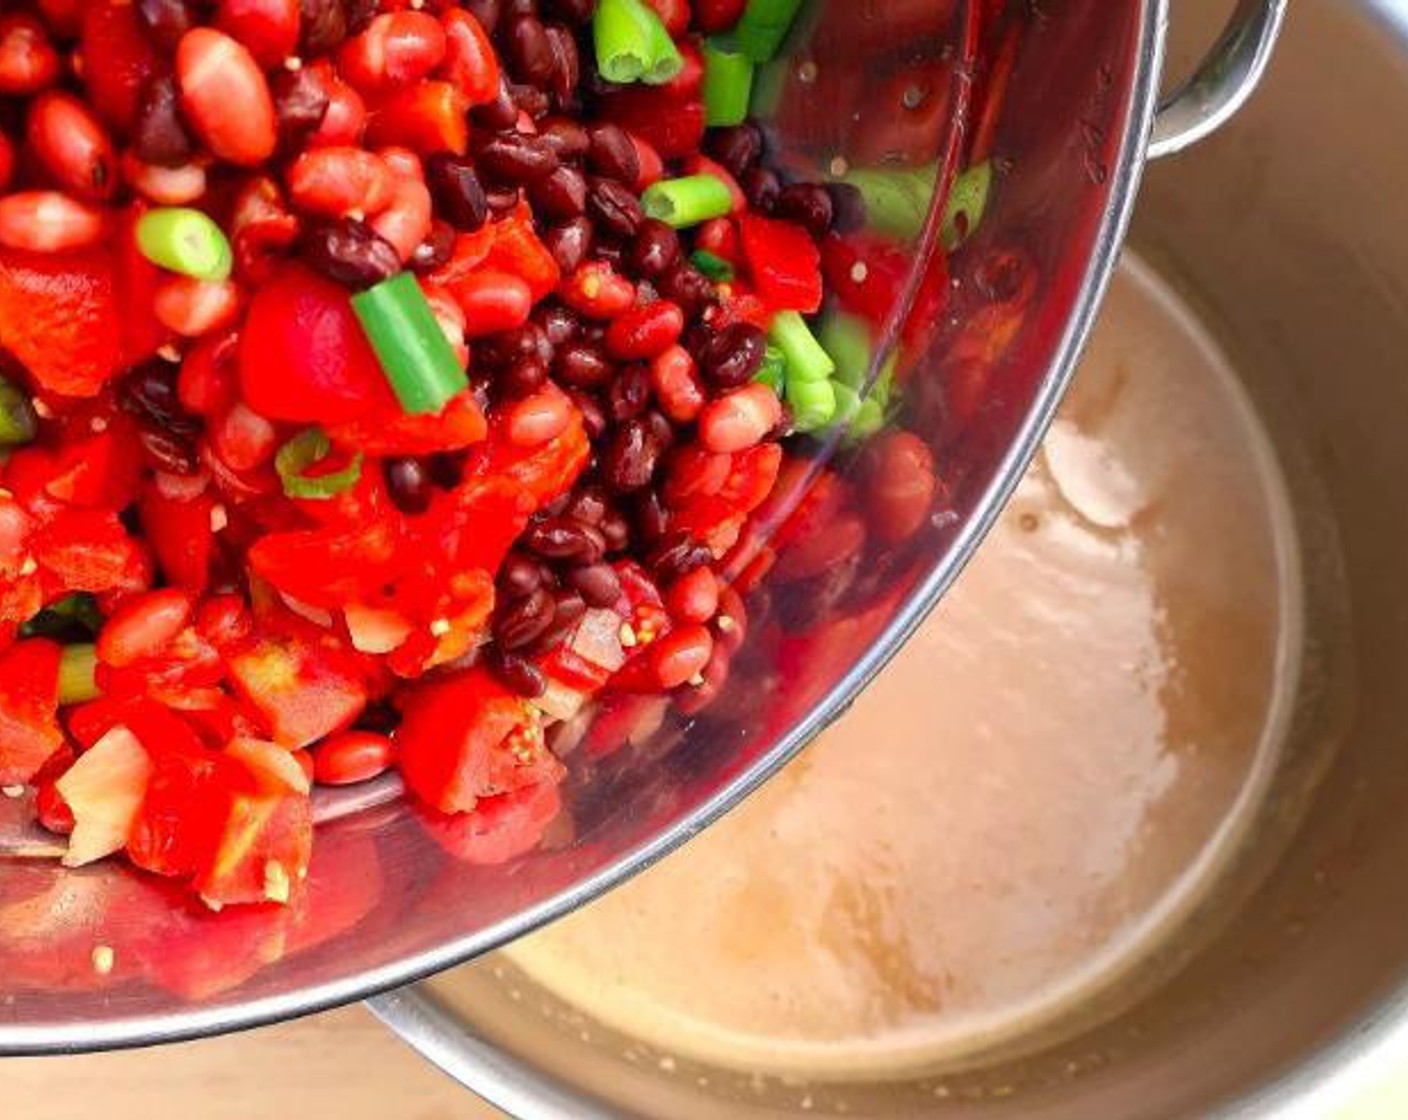 step 5 Add Diced Tomatoes (1 can), Black Beans (1 can), Red Kidney Beans (to taste), and Scallions (3 stalks). Simmer for 3 minutes.